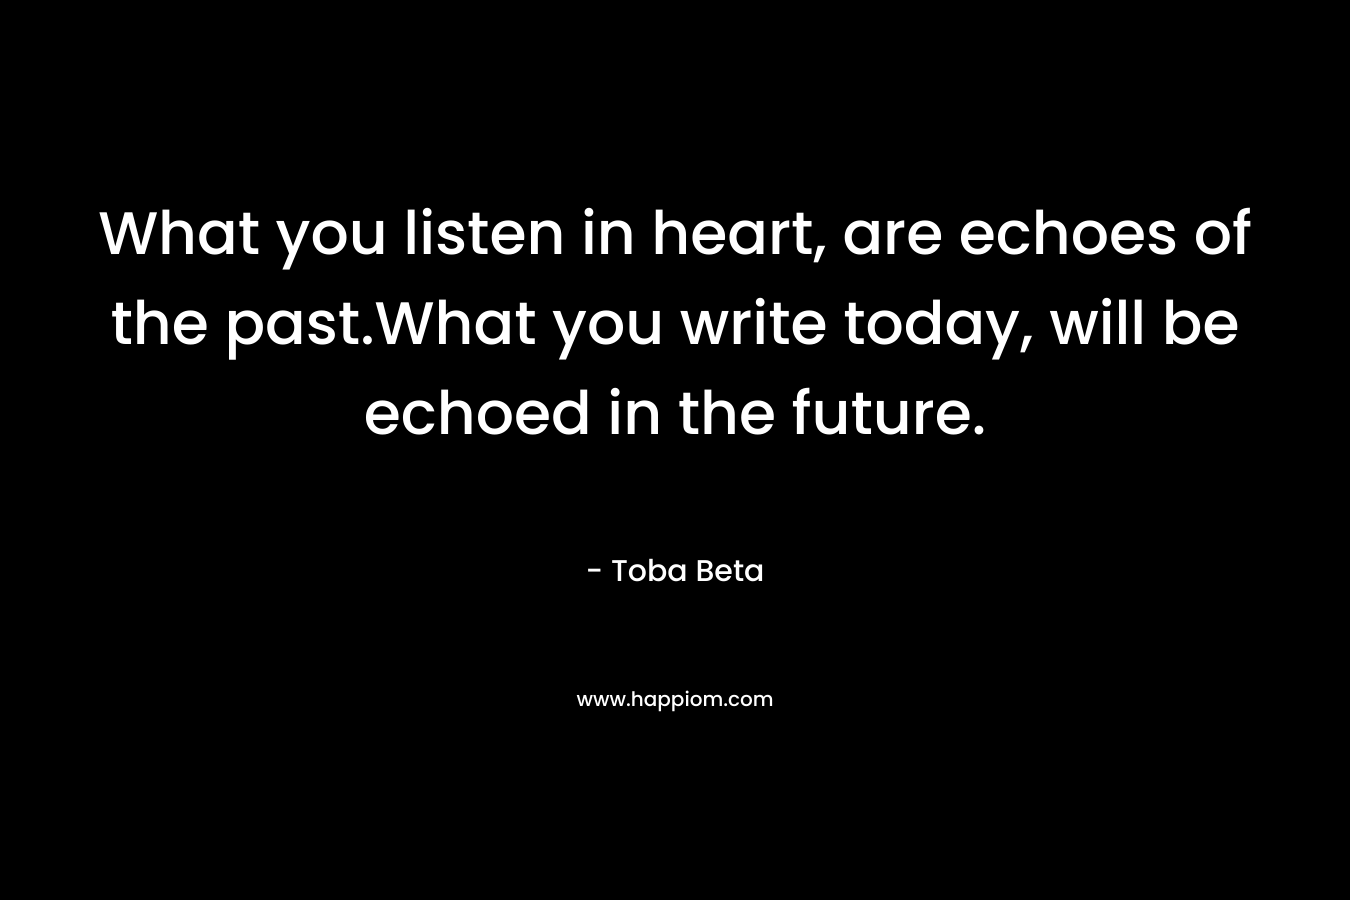 What you listen in heart, are echoes of the past.What you write today, will be echoed in the future. – Toba Beta